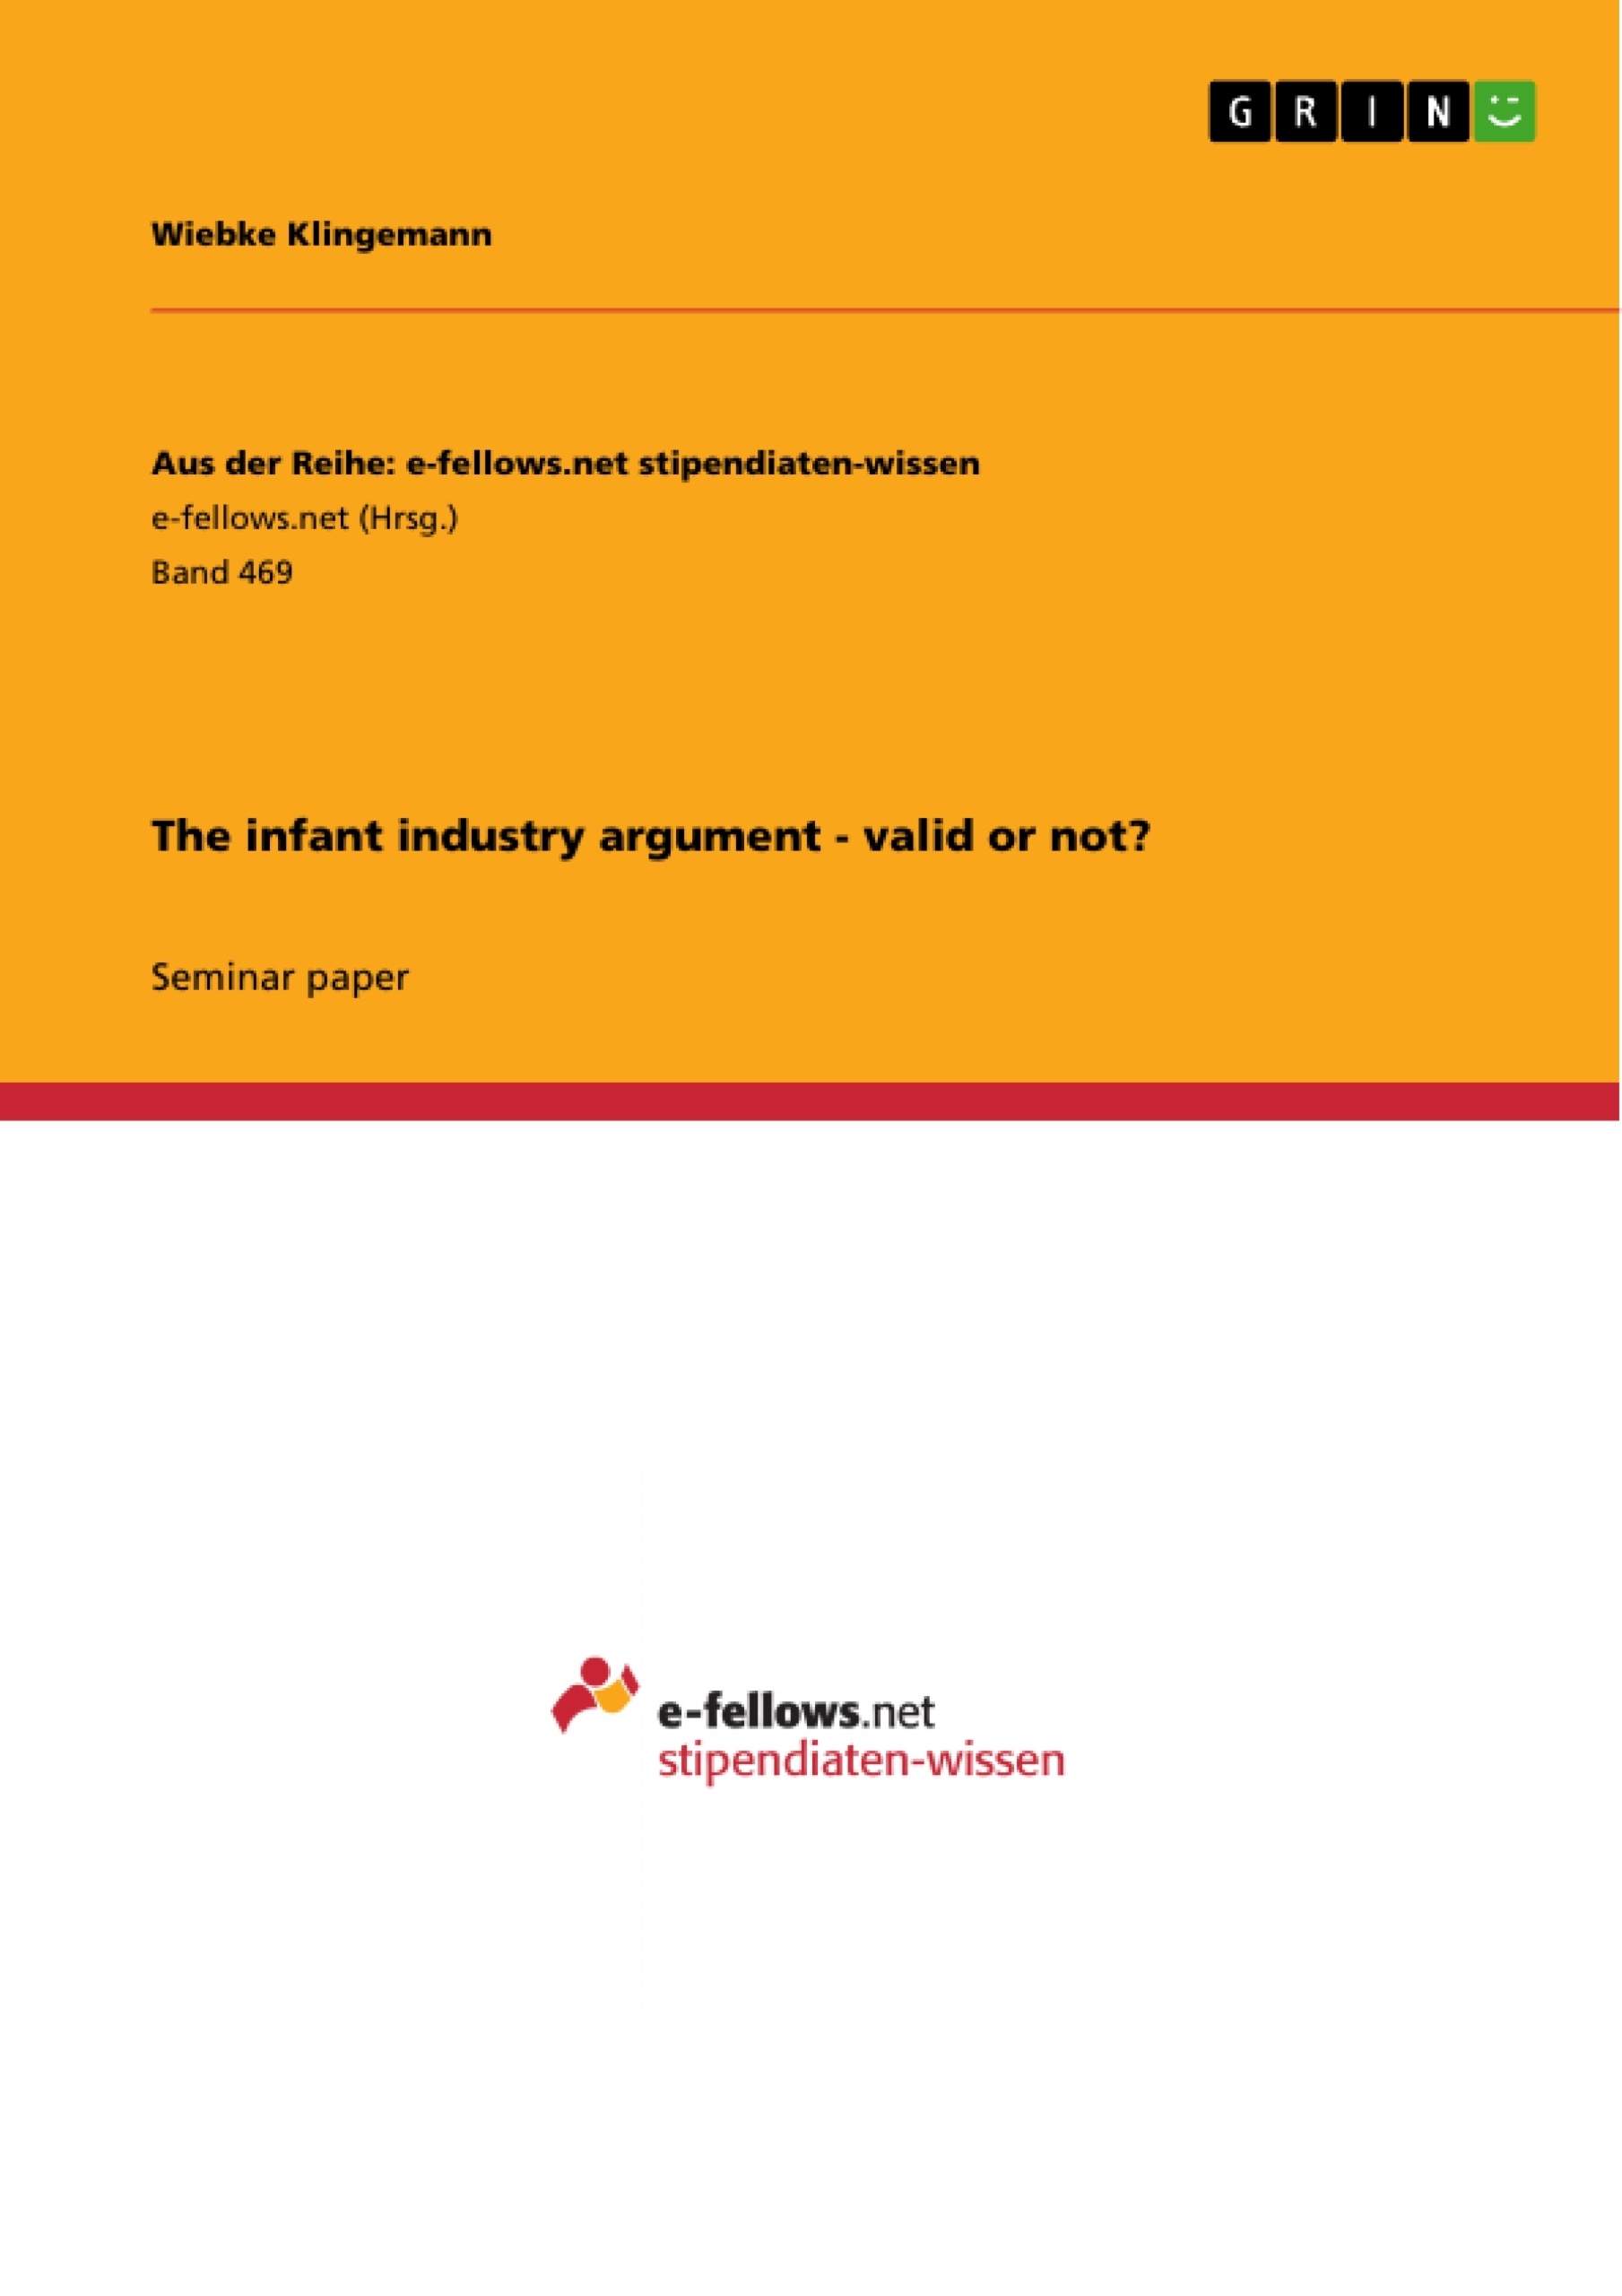 Title: The infant industry argument - valid or not?